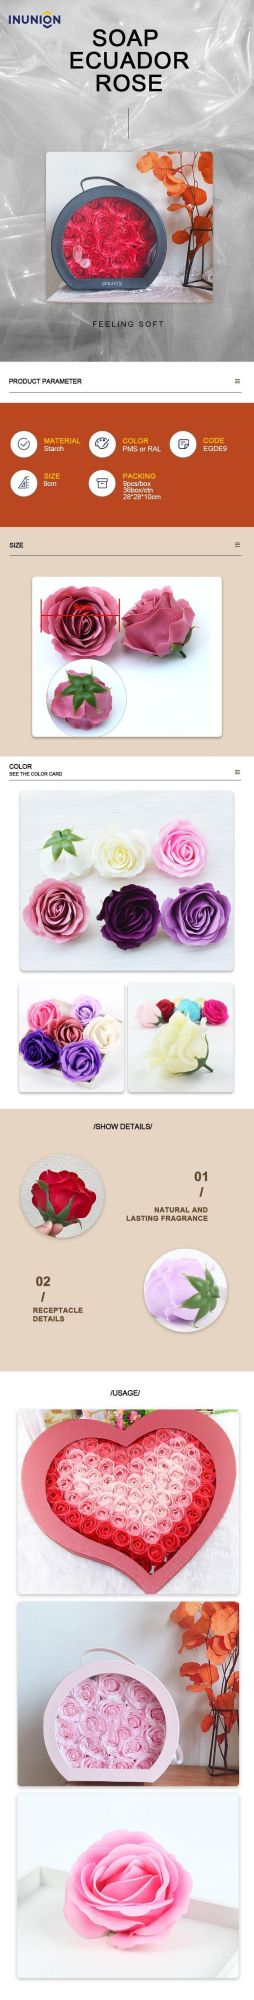 Wholesale Artificial Soap Rose Flower Petal Lasting Women Mom Girls Birthday Valentine′s Day Mother′s Gifts